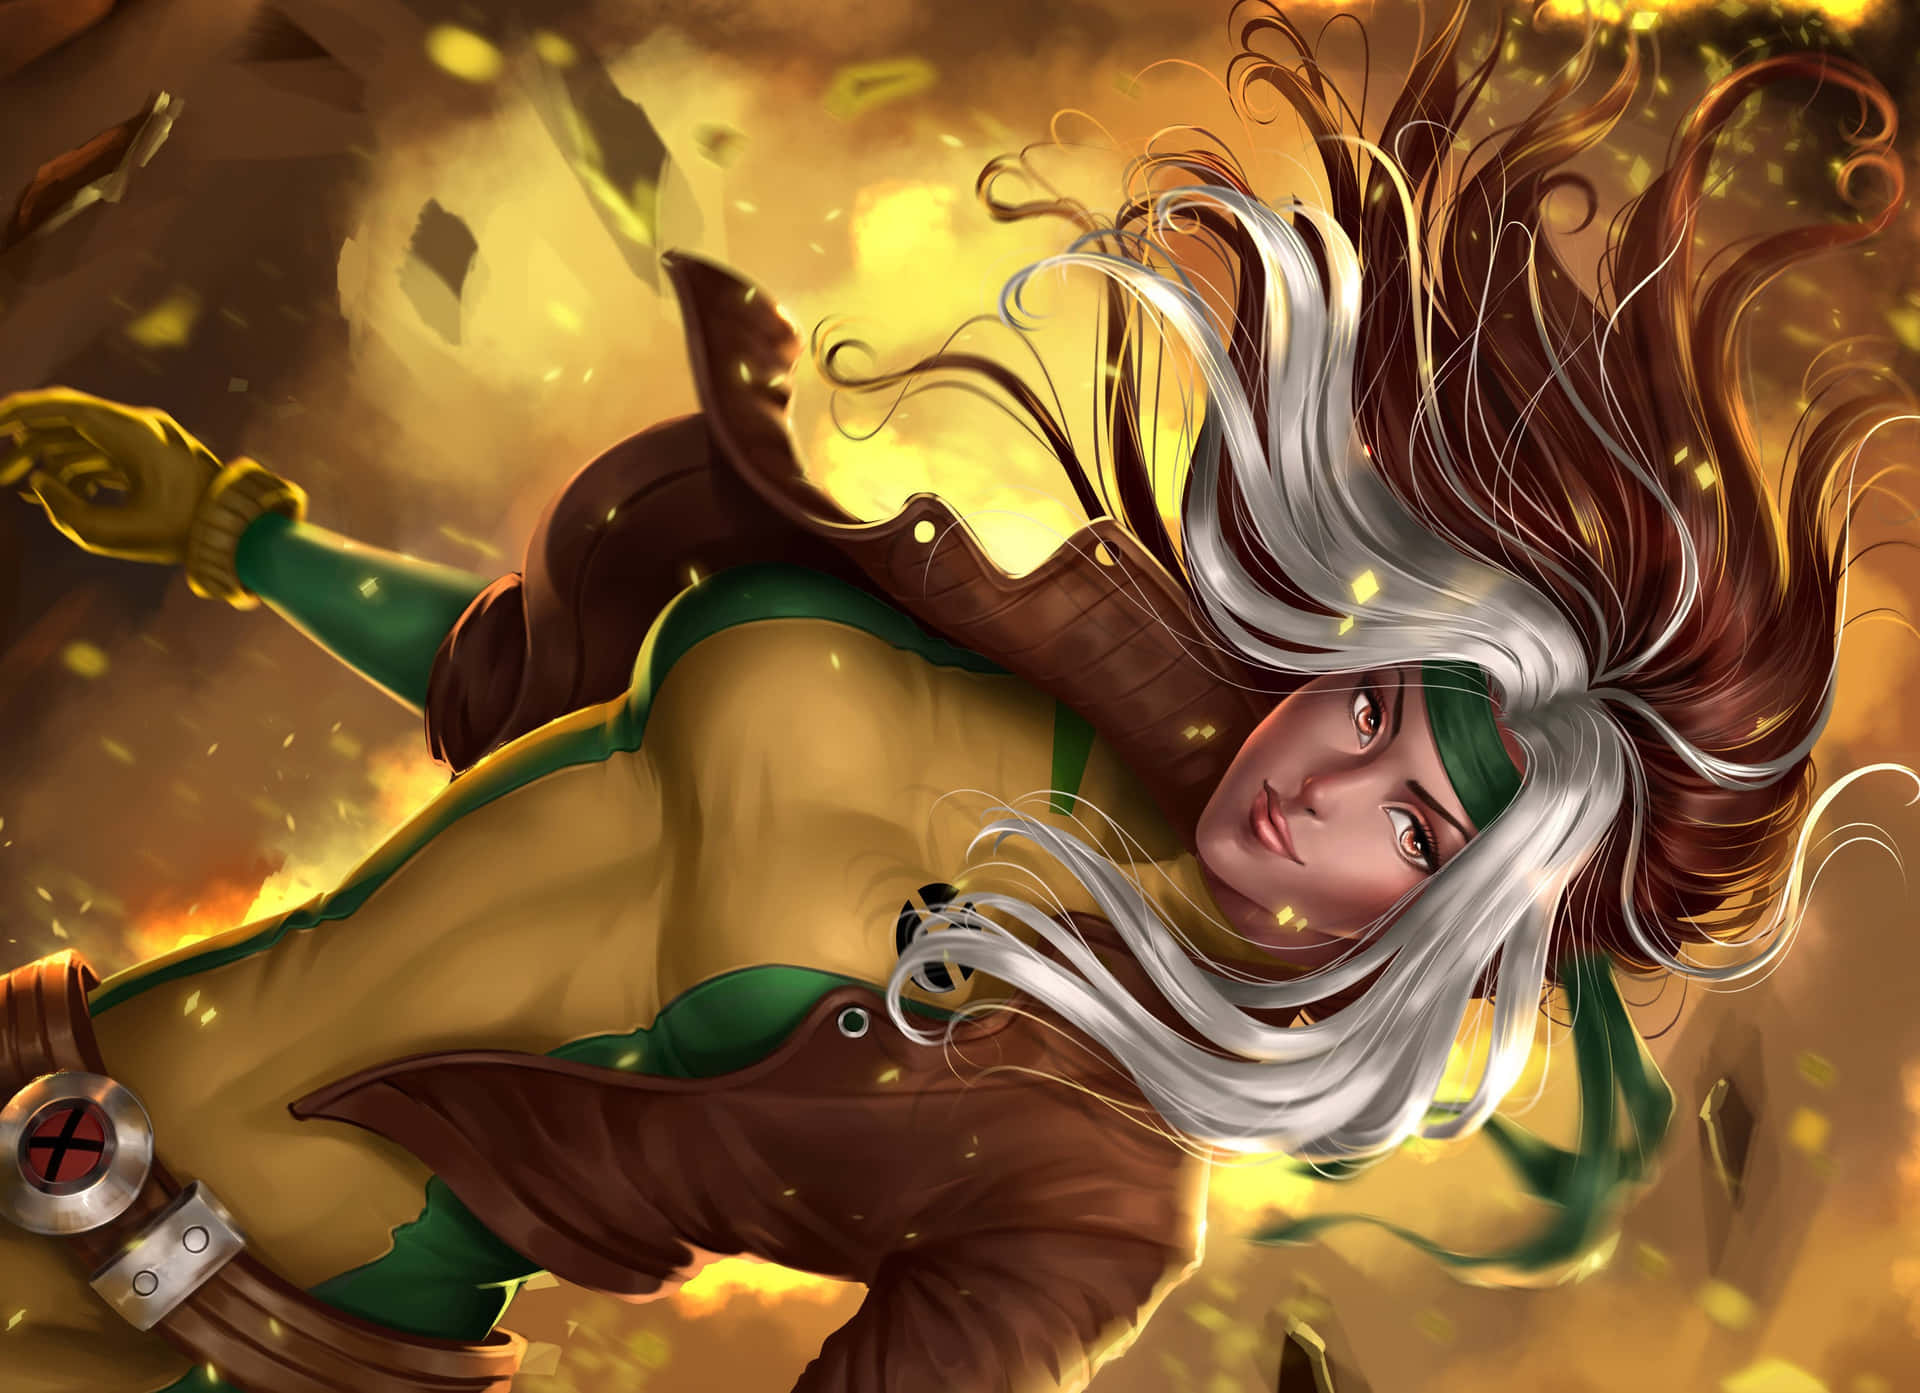 A Female Comic Character With Long Hair And Green Eyes Wallpaper